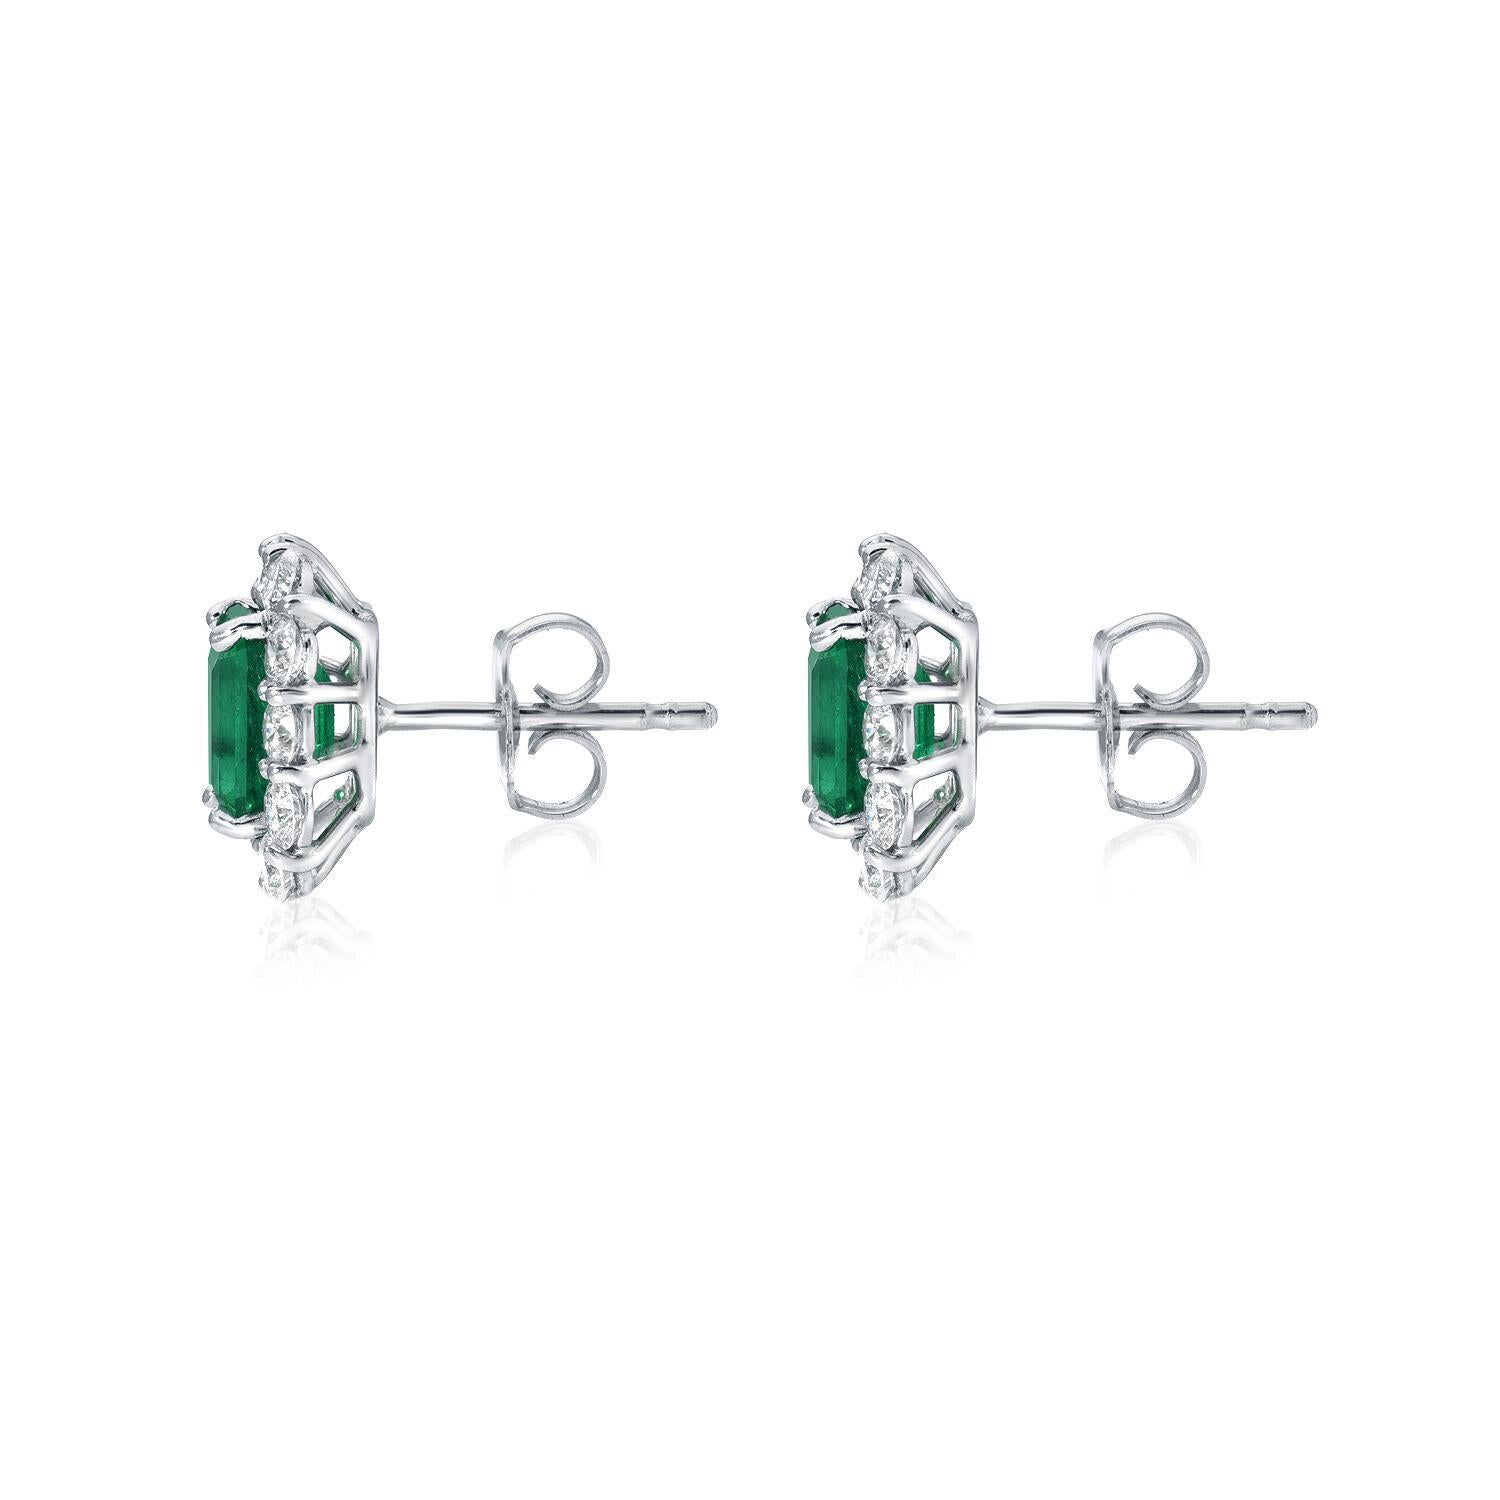 Colombian Emerald stud earrings, featuring a pair of emerald cuts weighing a total of 2.27 carats, surrounded by a total of 1.32 carats of round brilliant diamonds, in 18K white gold.
Returns are accepted and paid by us within 7 days of